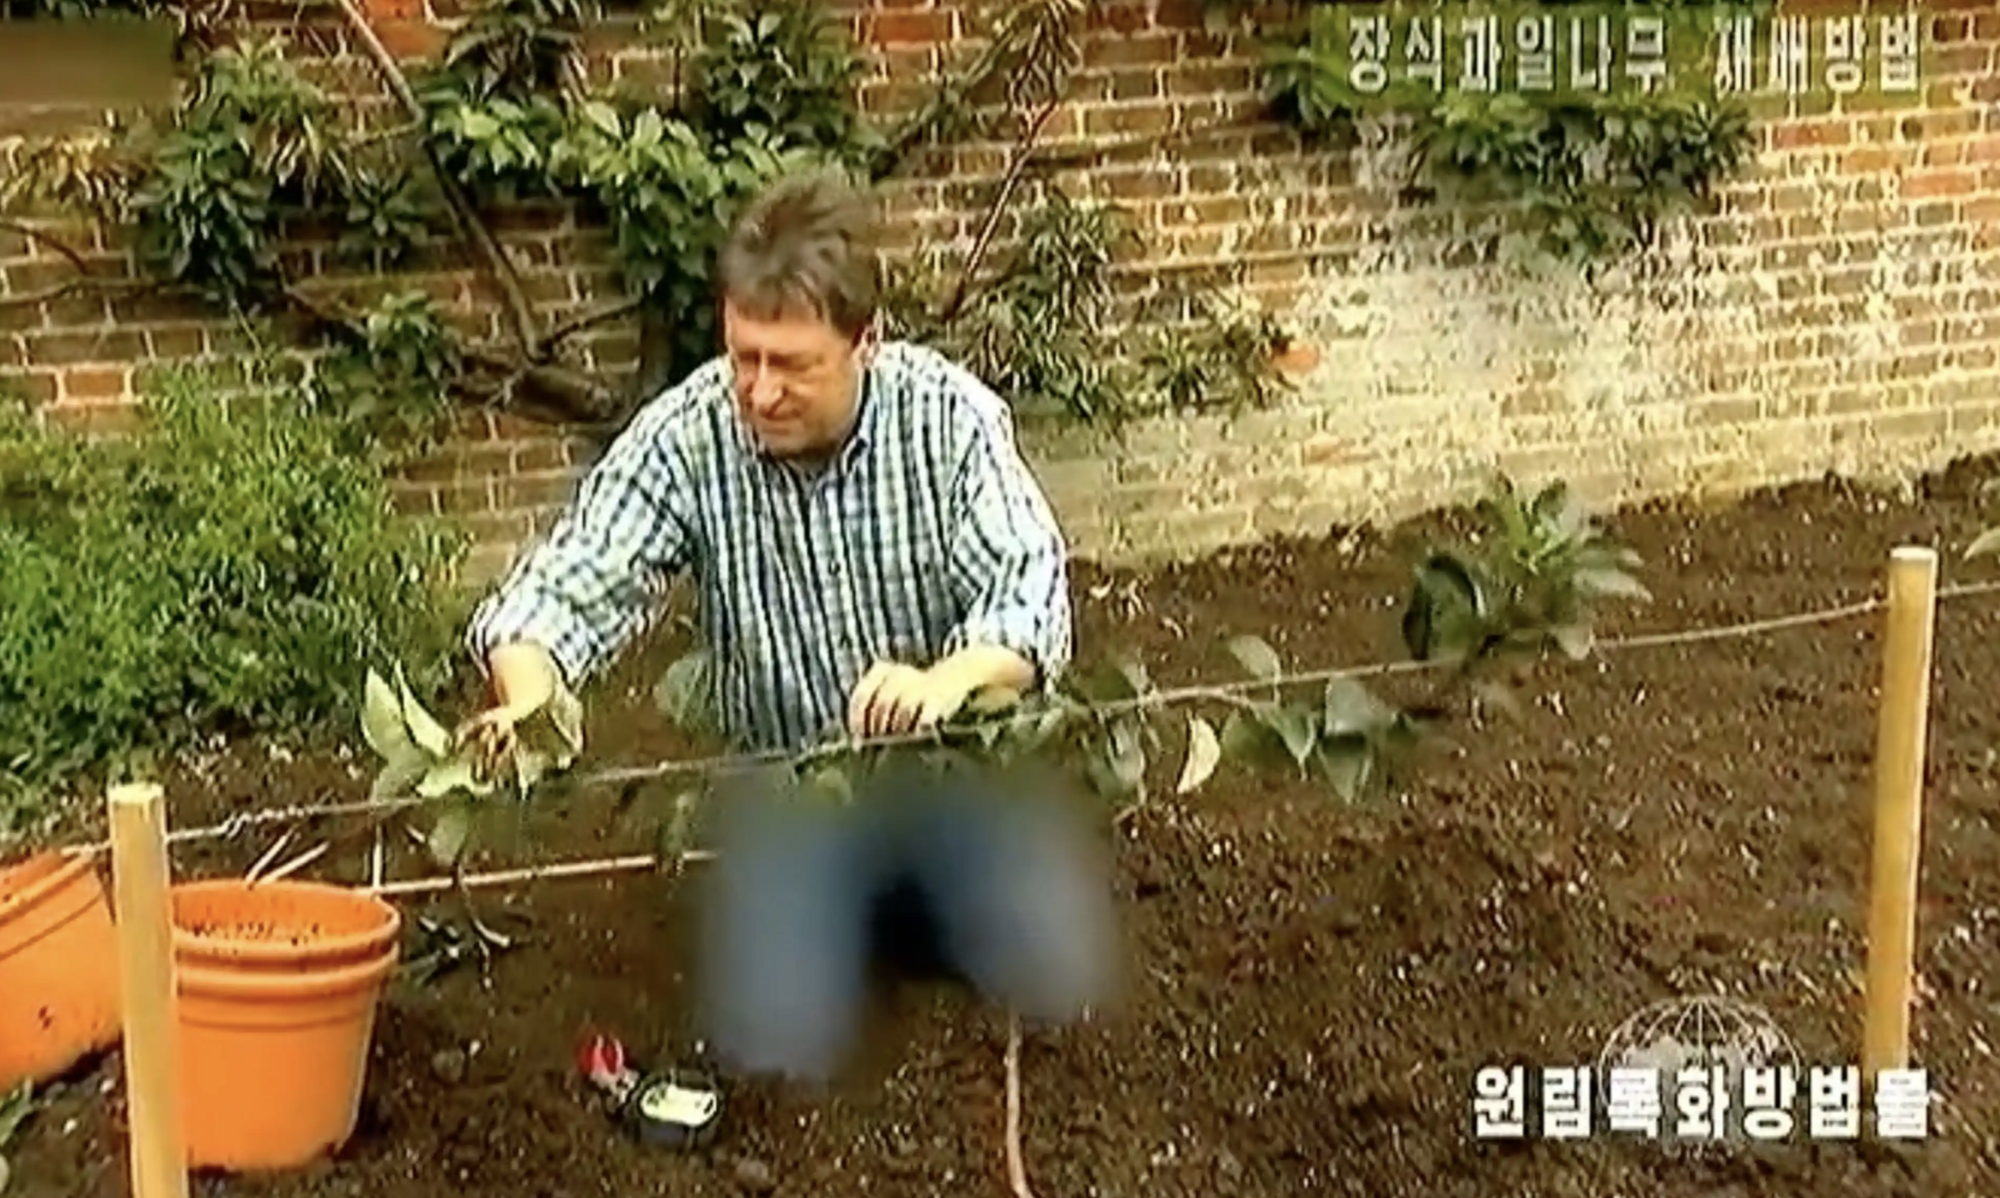 The BBC presenter's jeans were censored on North Korean television: what's wrong with them? Photo and video